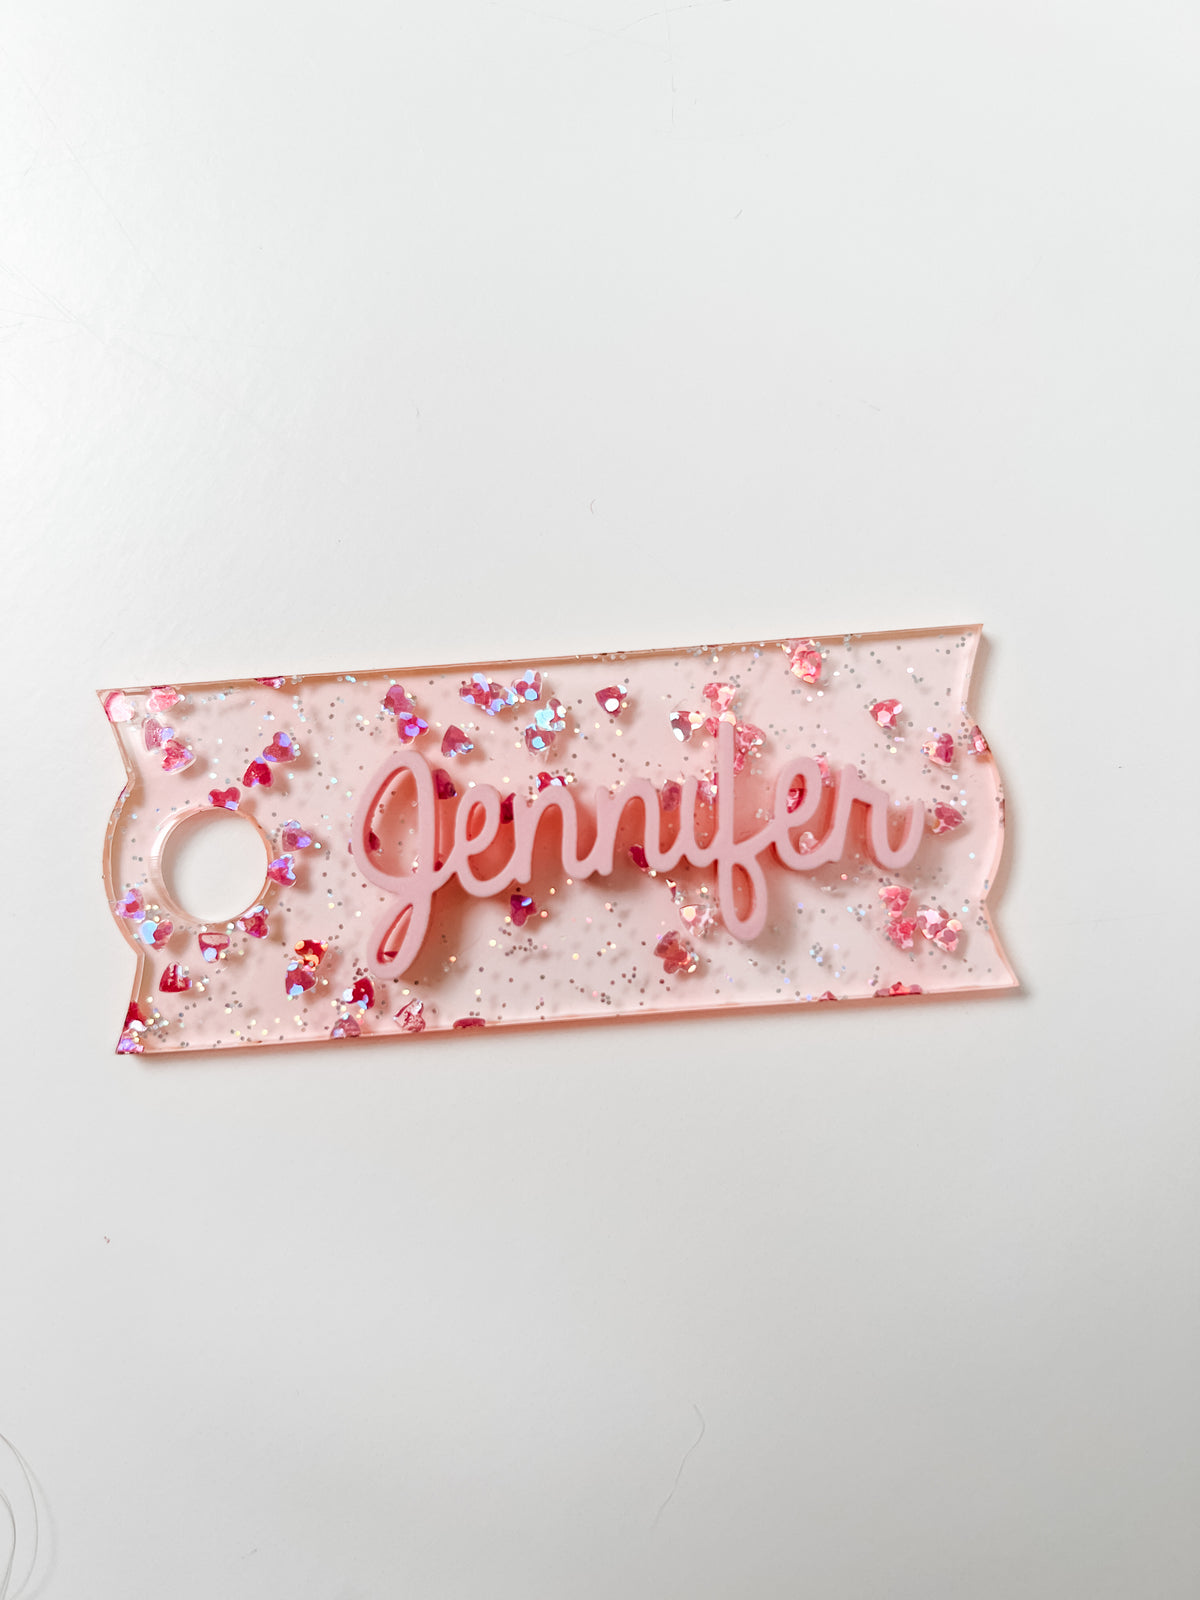 Tumbler Name Plate- Pink Glitter Heart with Name